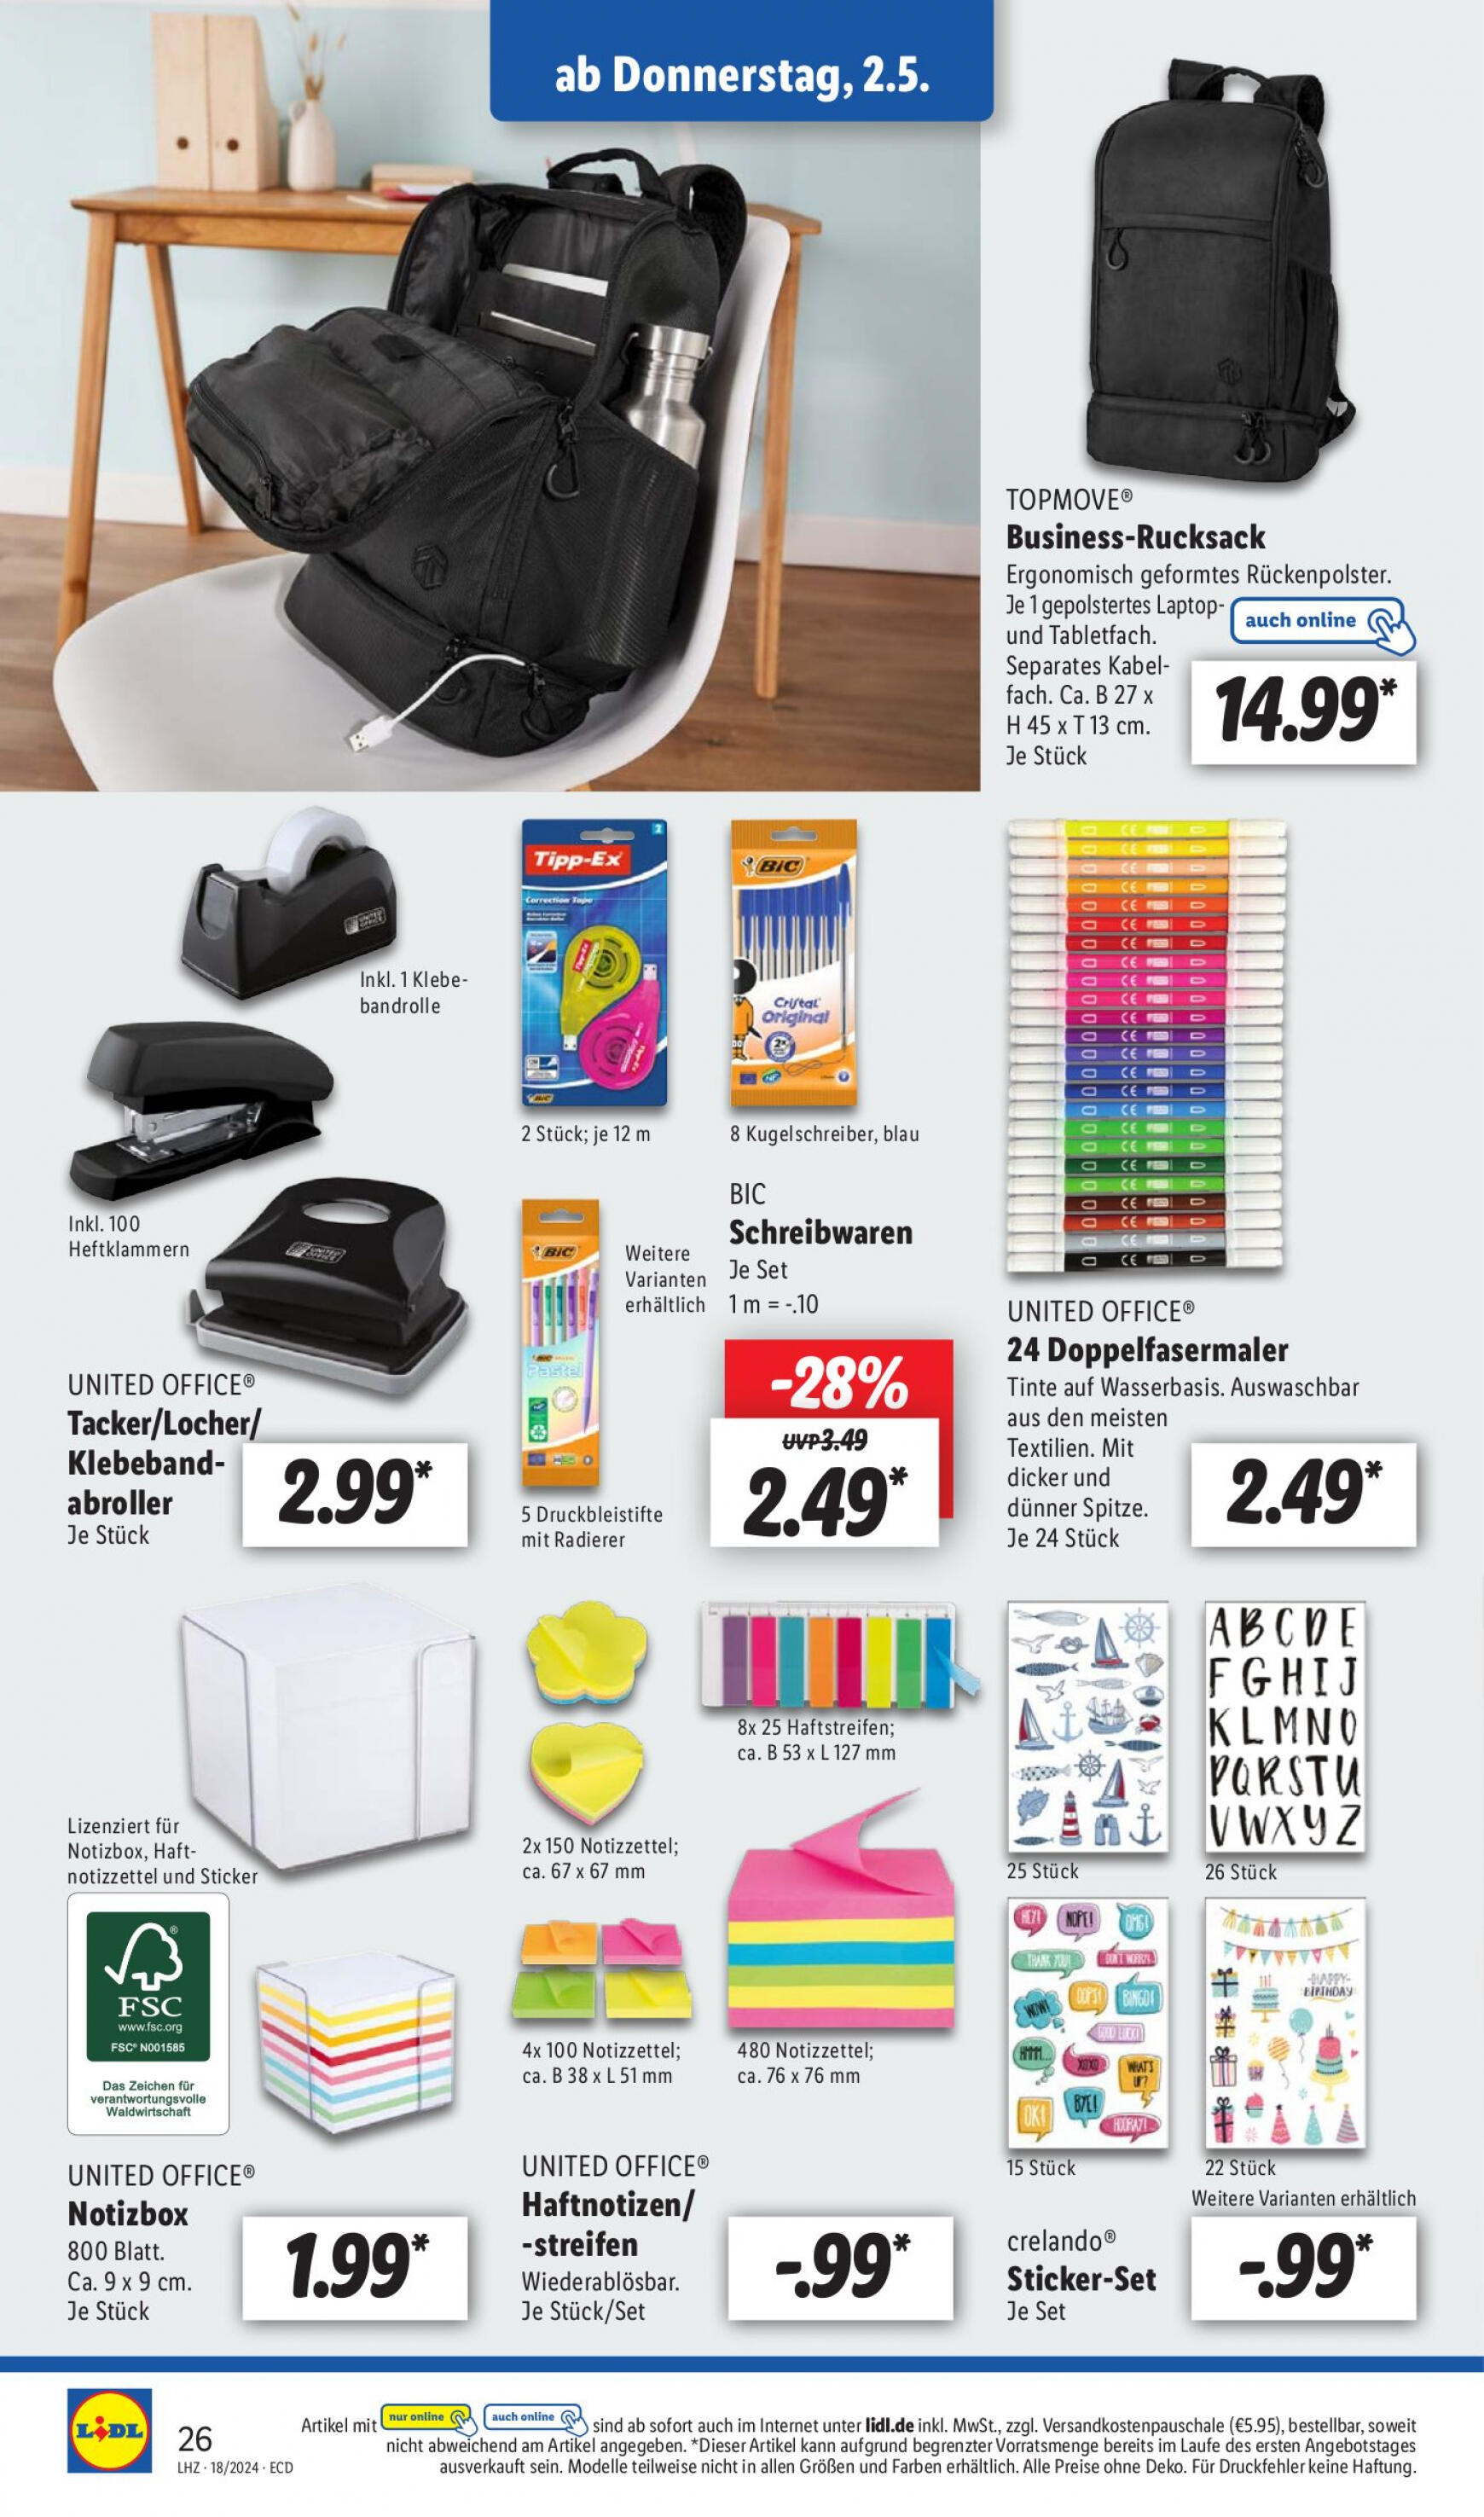 lidl - Flyer Lidl aktuell 29.04. - 04.05. - page: 30